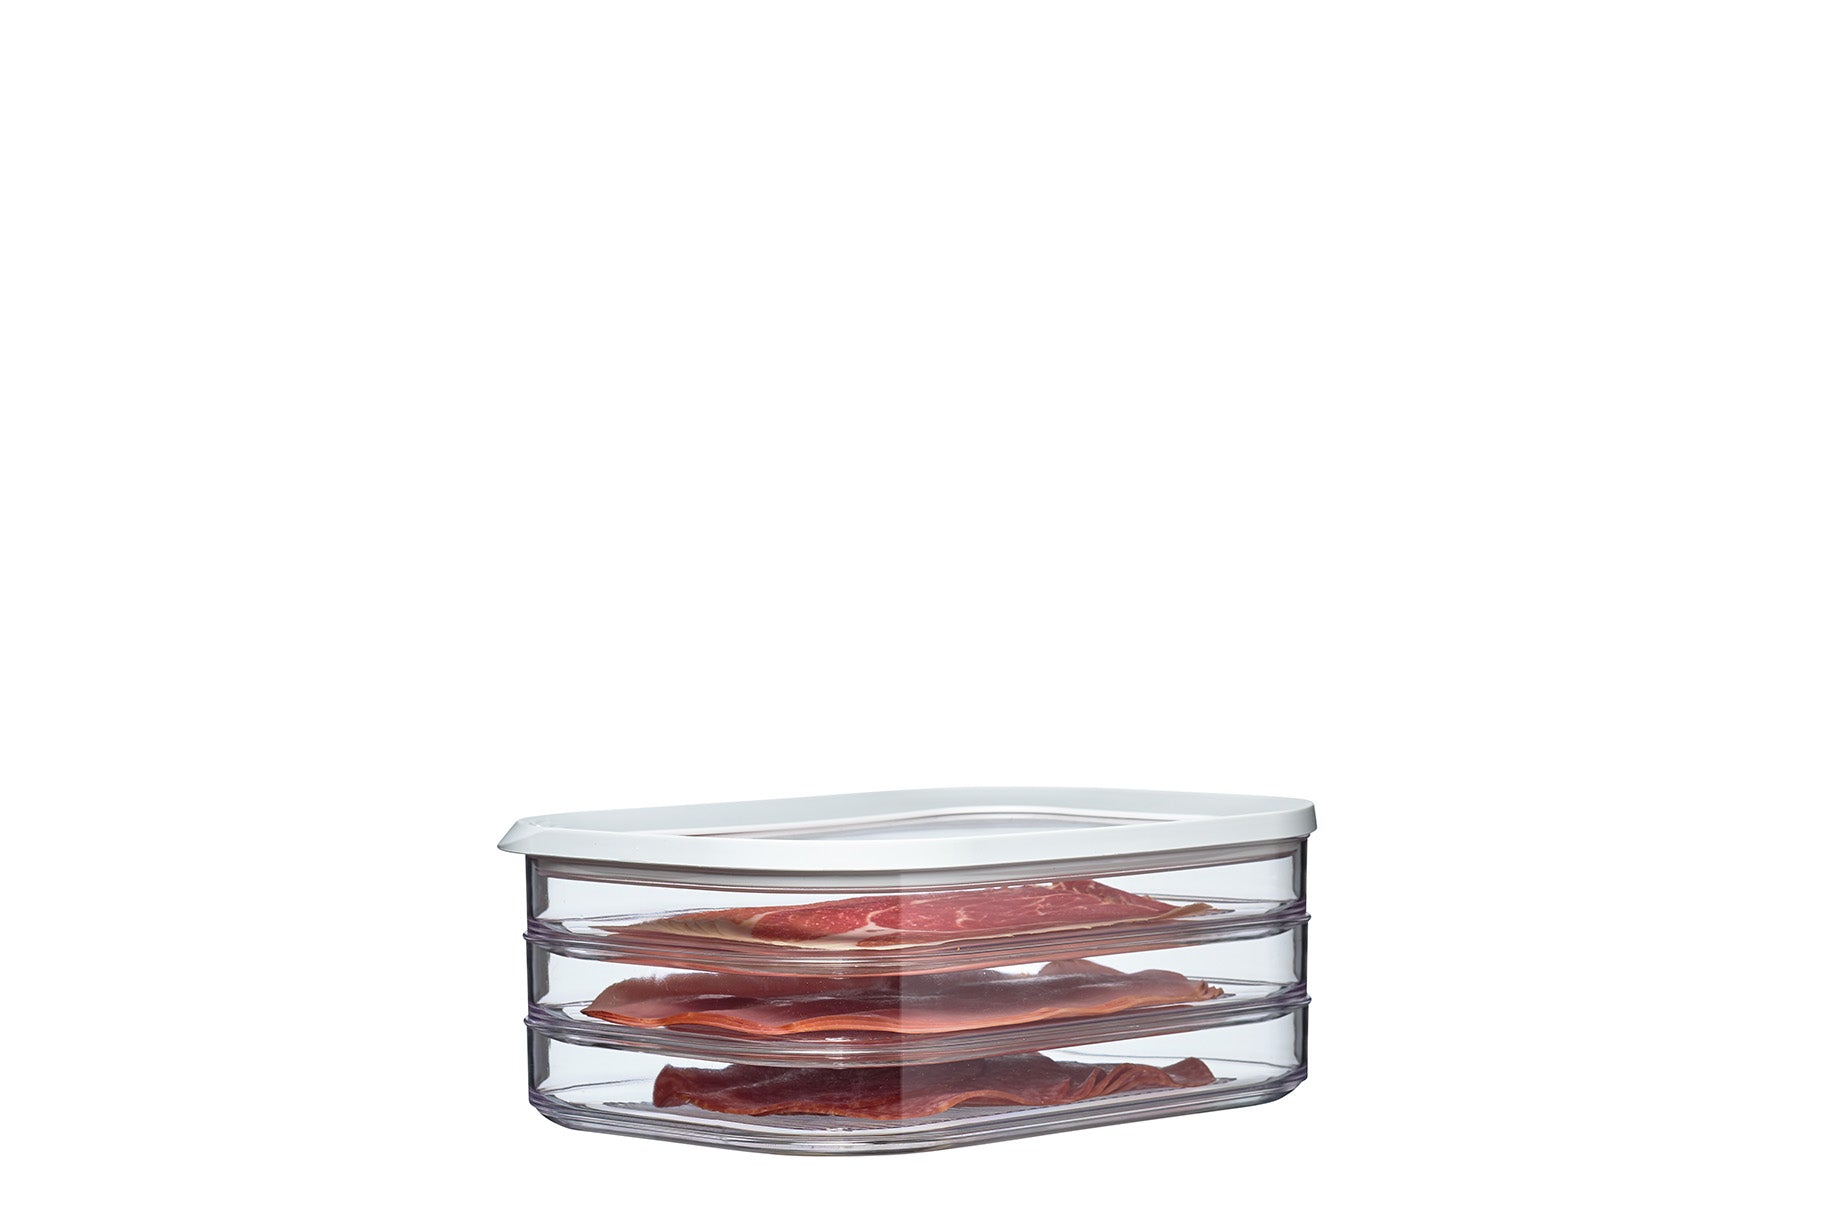 Fridge Storage | This airtight storage box is perfect for storing cold cooked meats